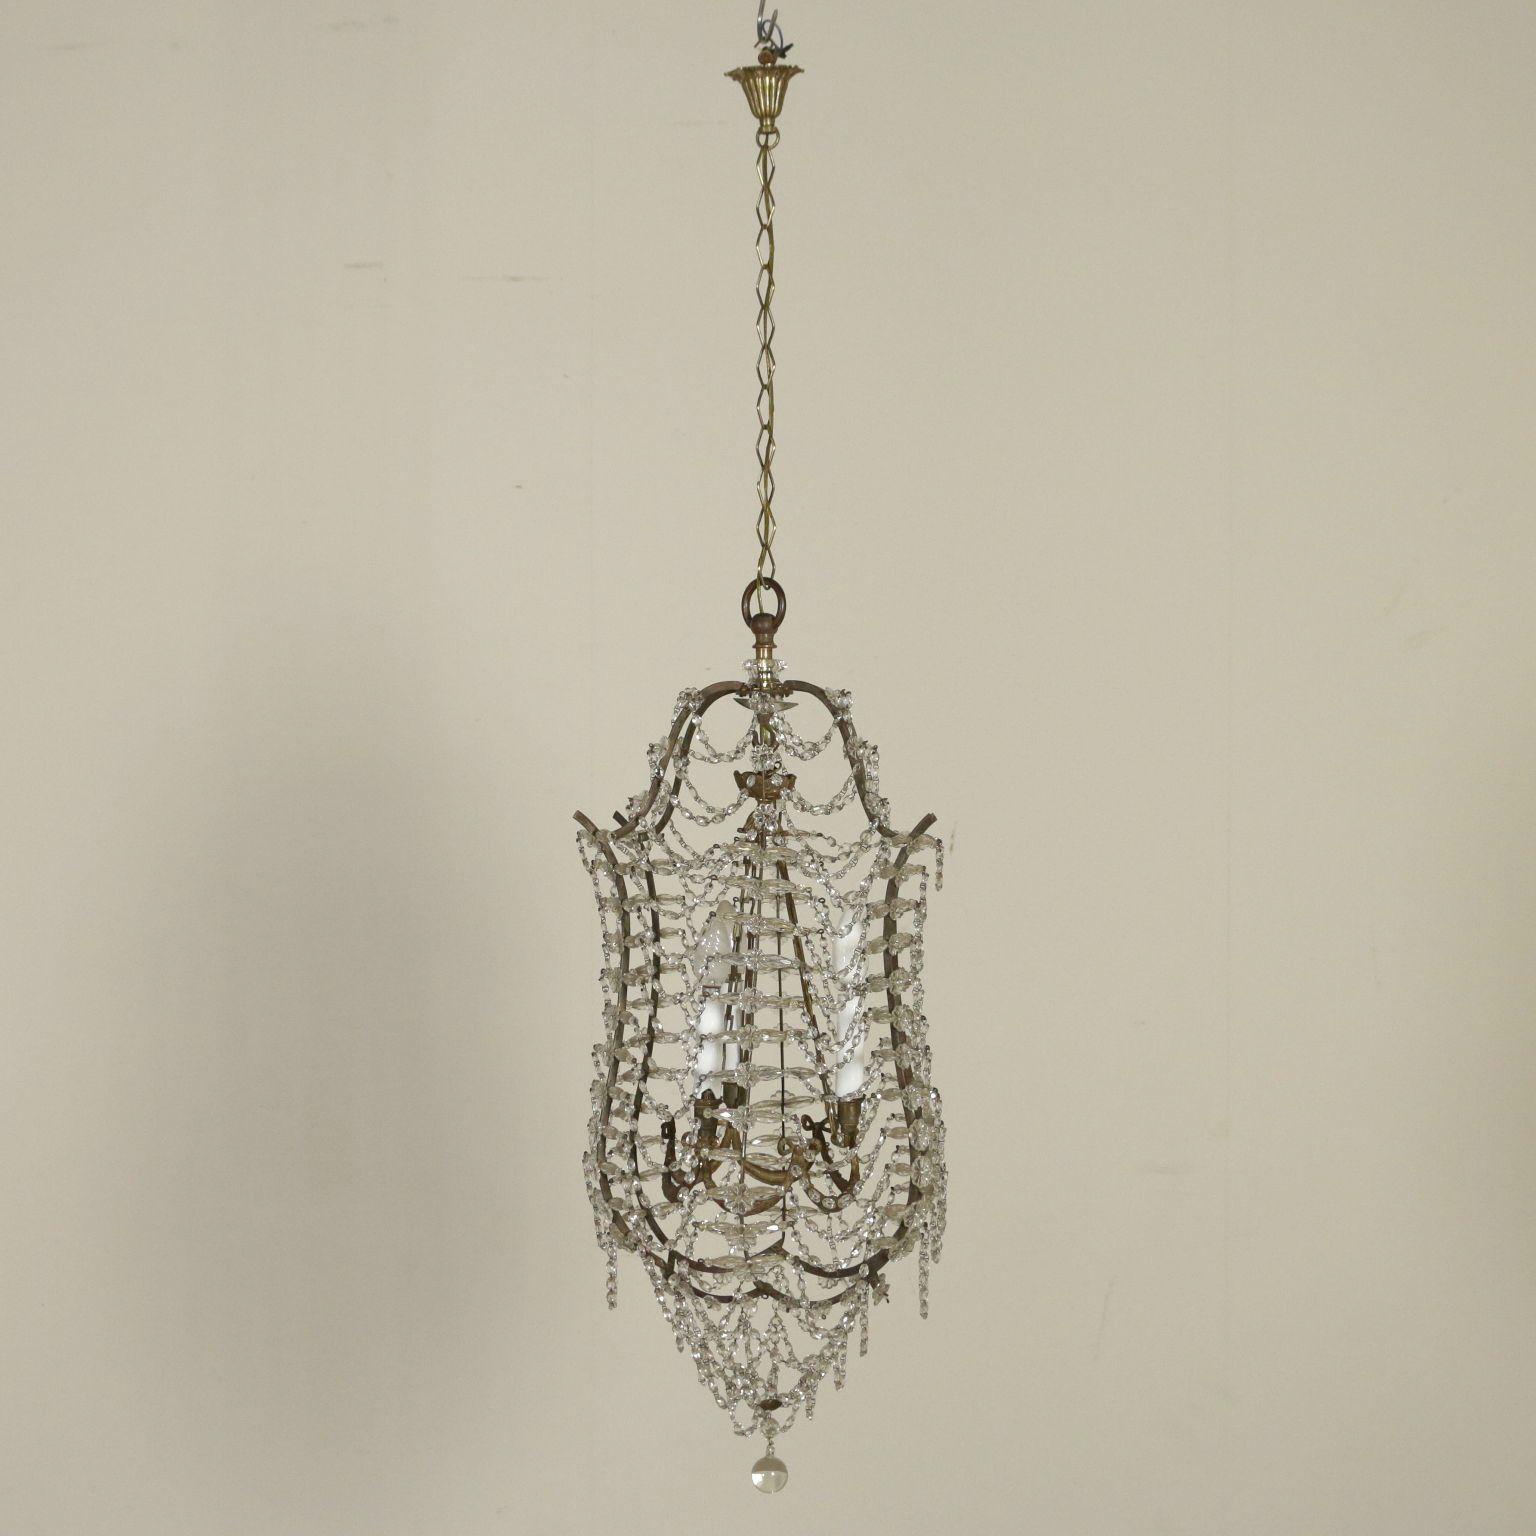 Scrolling cage form centered by three arms, hung with beaded drapes and facet cut prism.